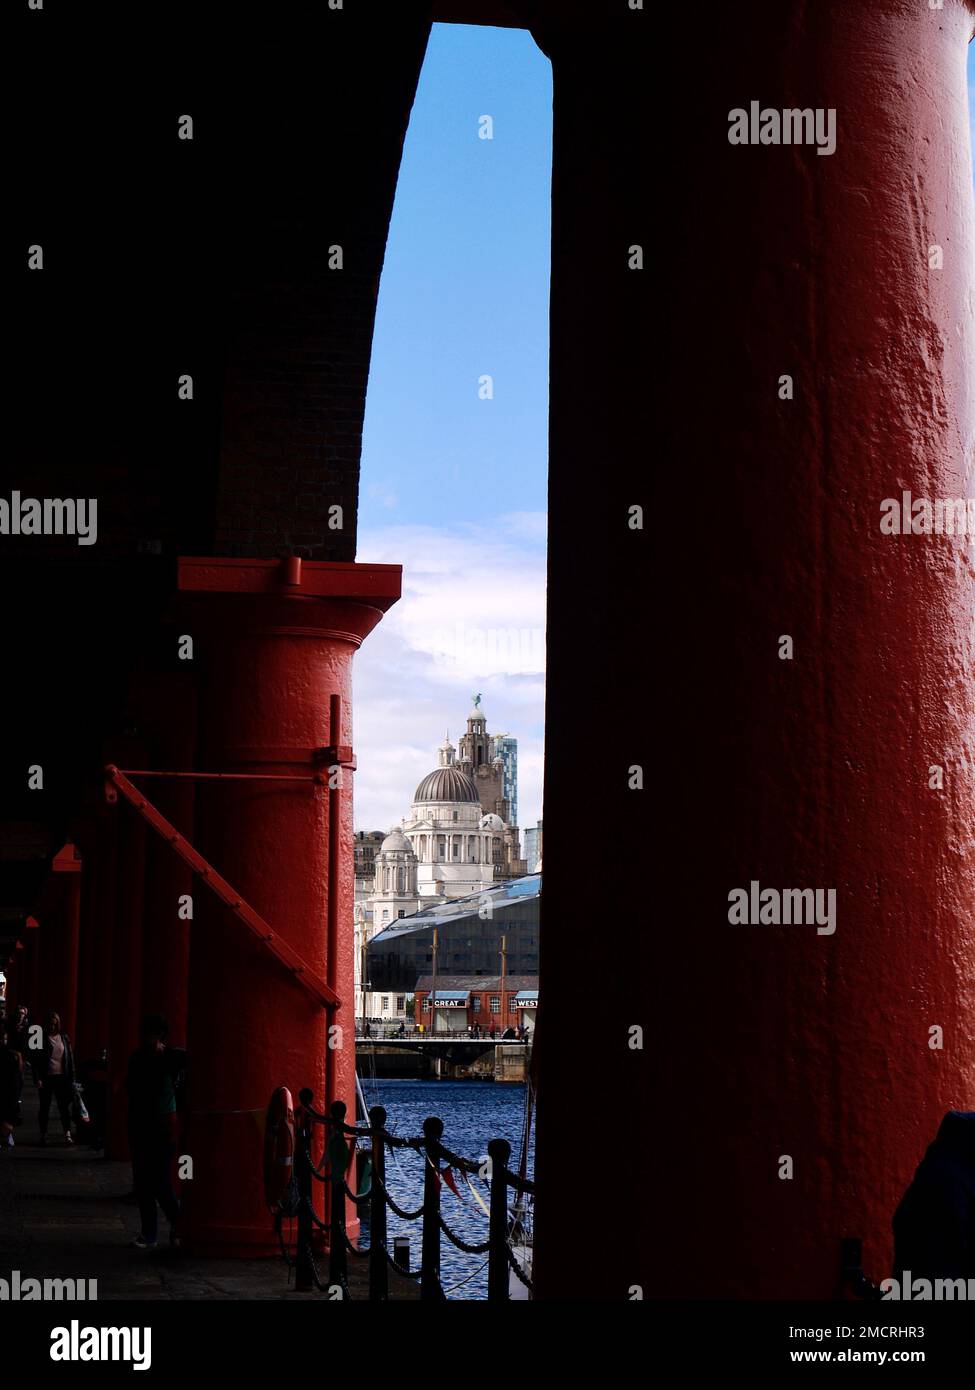 The Liver Building as seen through the imposing red painted columns of the refurbished Royal Albert Dock, Liverpool Stock Photo